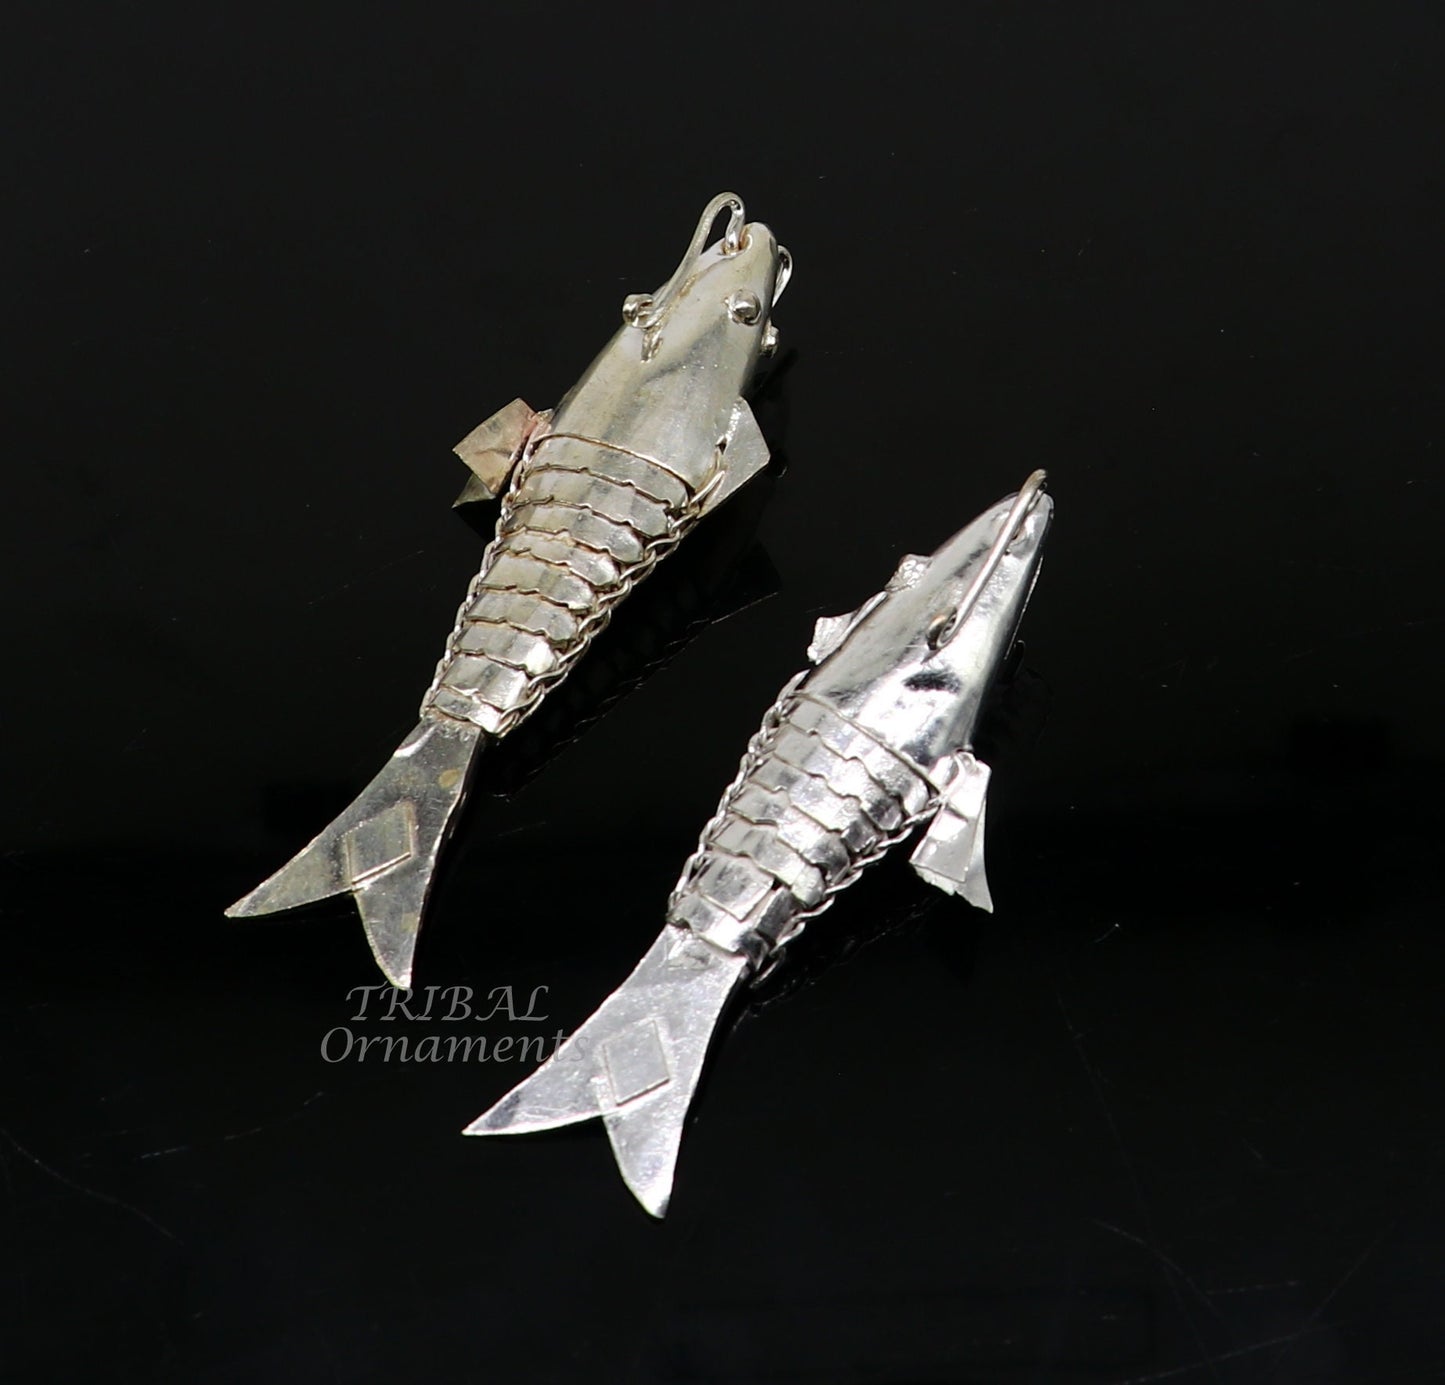 Solid silver handmade silver fish, Lord vishnu avatar Matsya, Silver Puja Fish For Prosperity And Good Luck, best collectible art su901 - TRIBAL ORNAMENTS